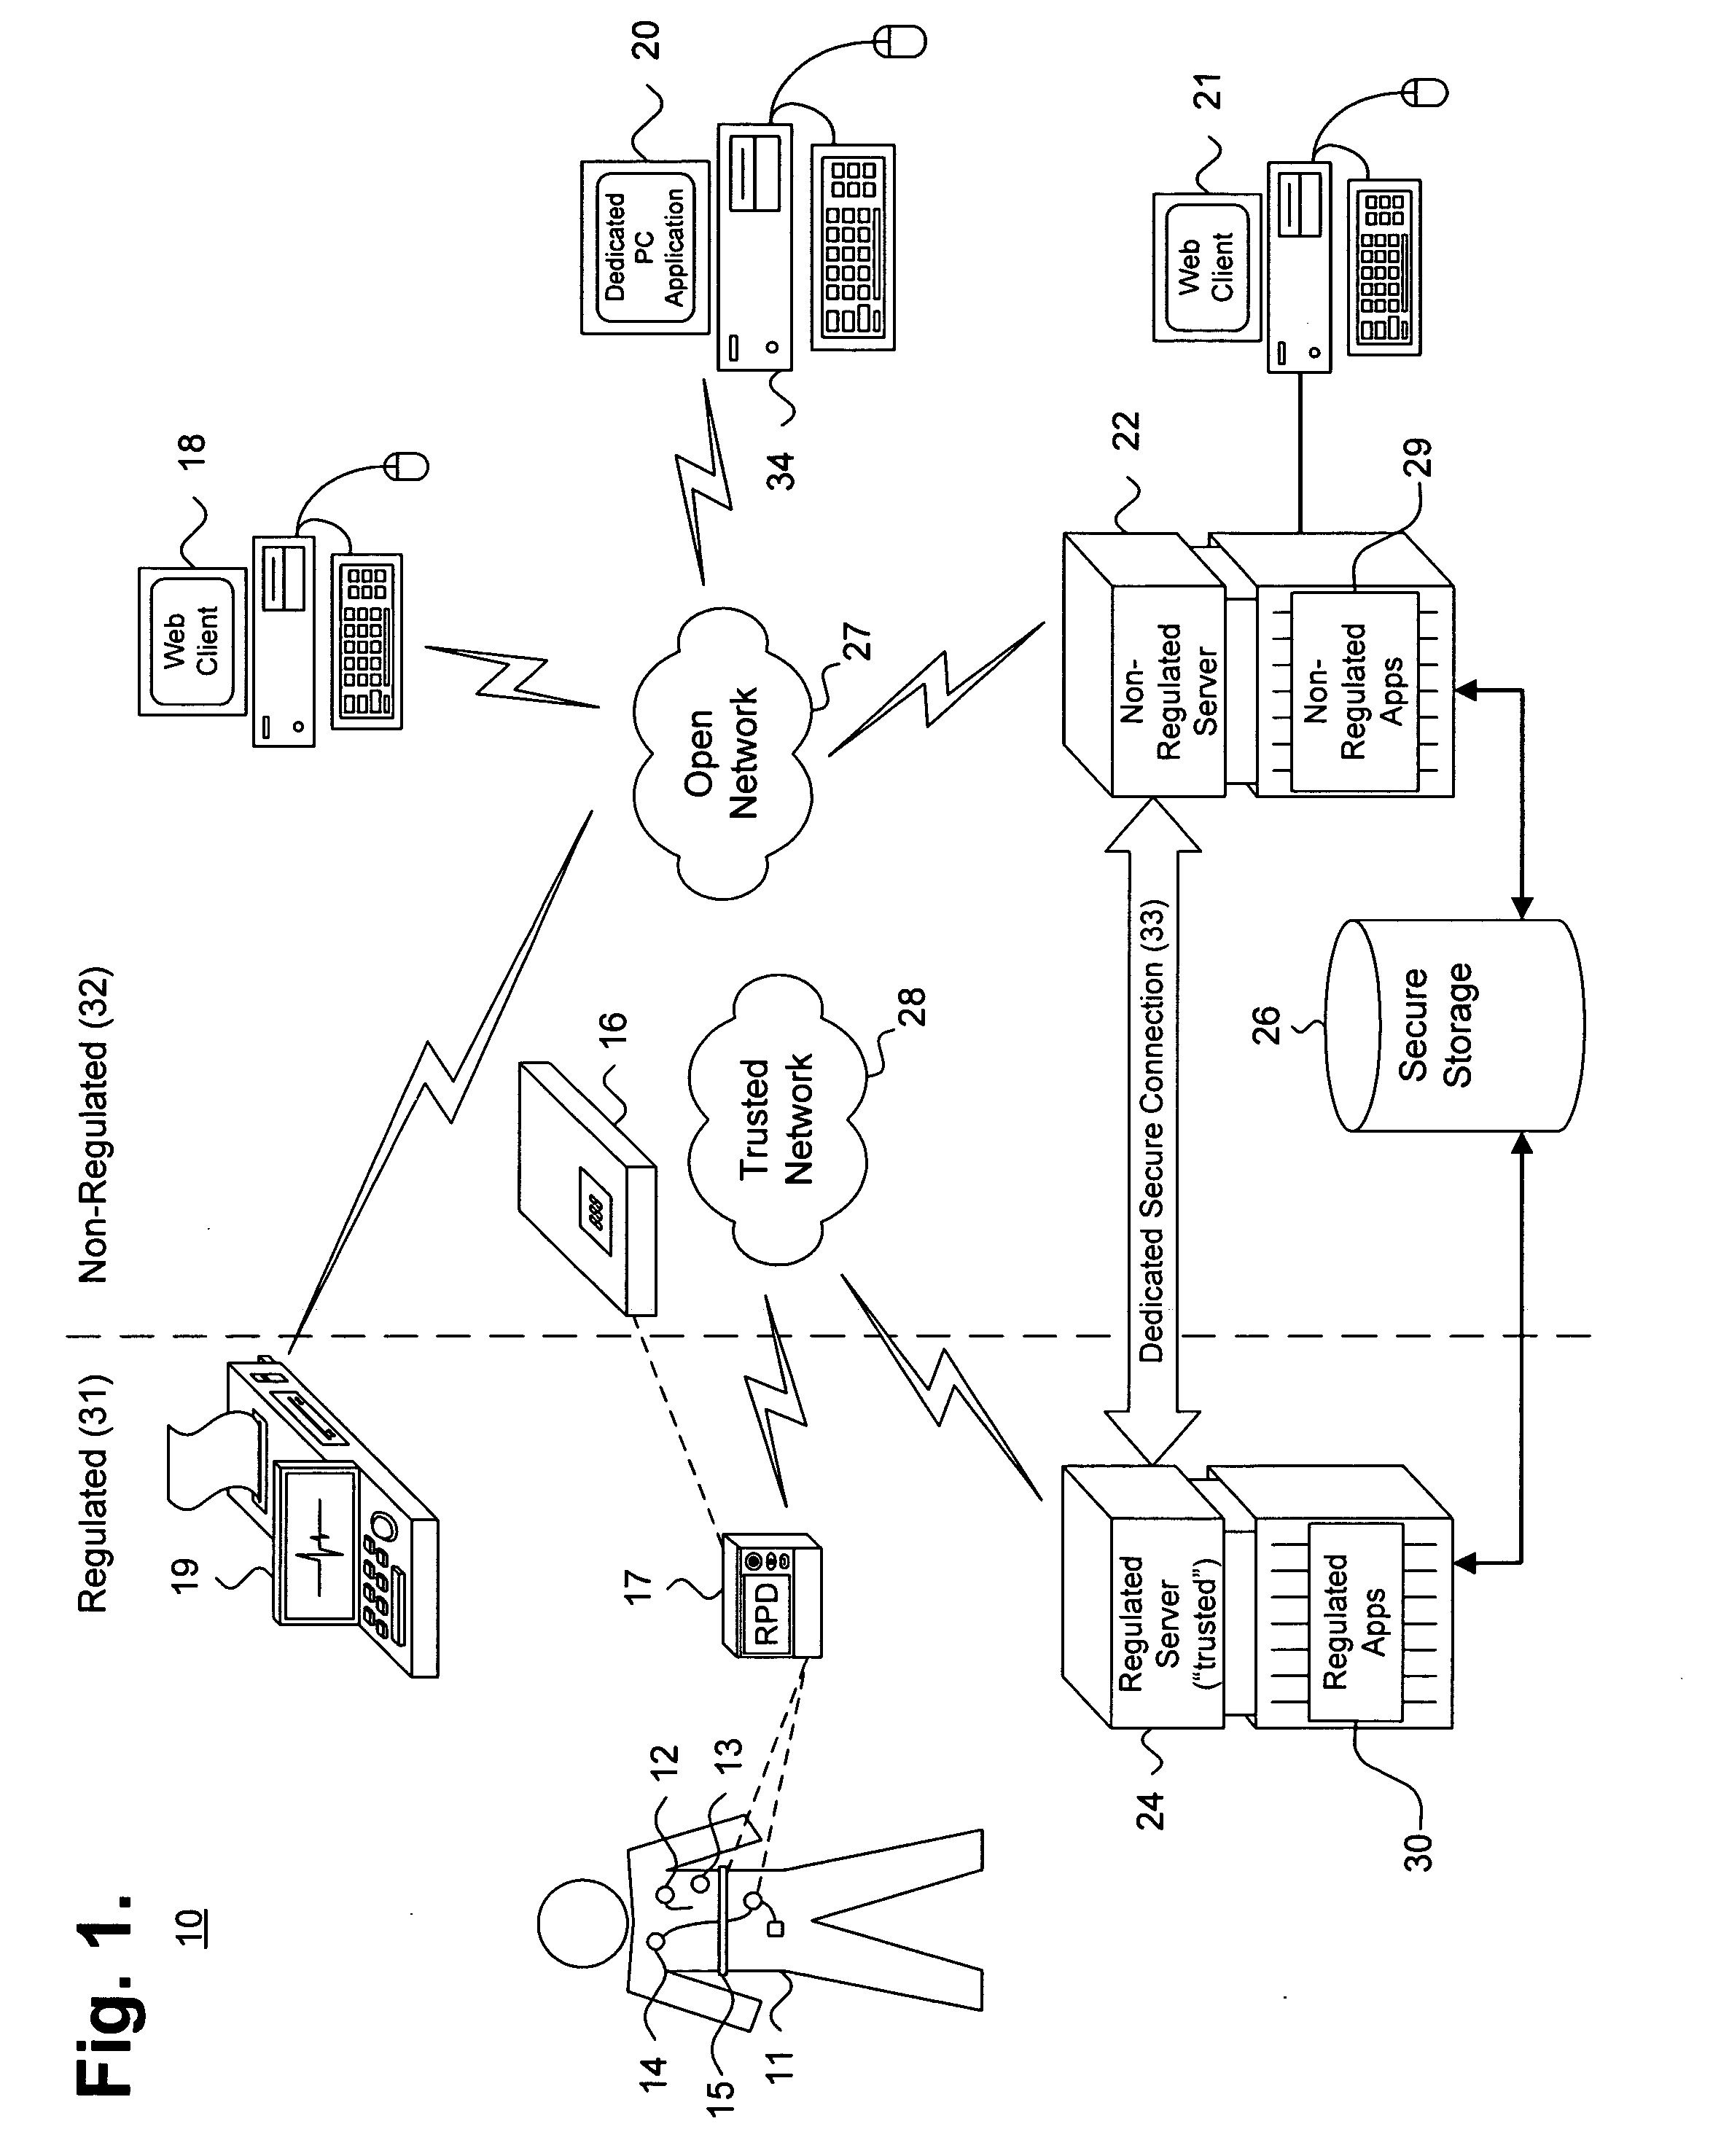 System and method for remotely programming a patient medical device